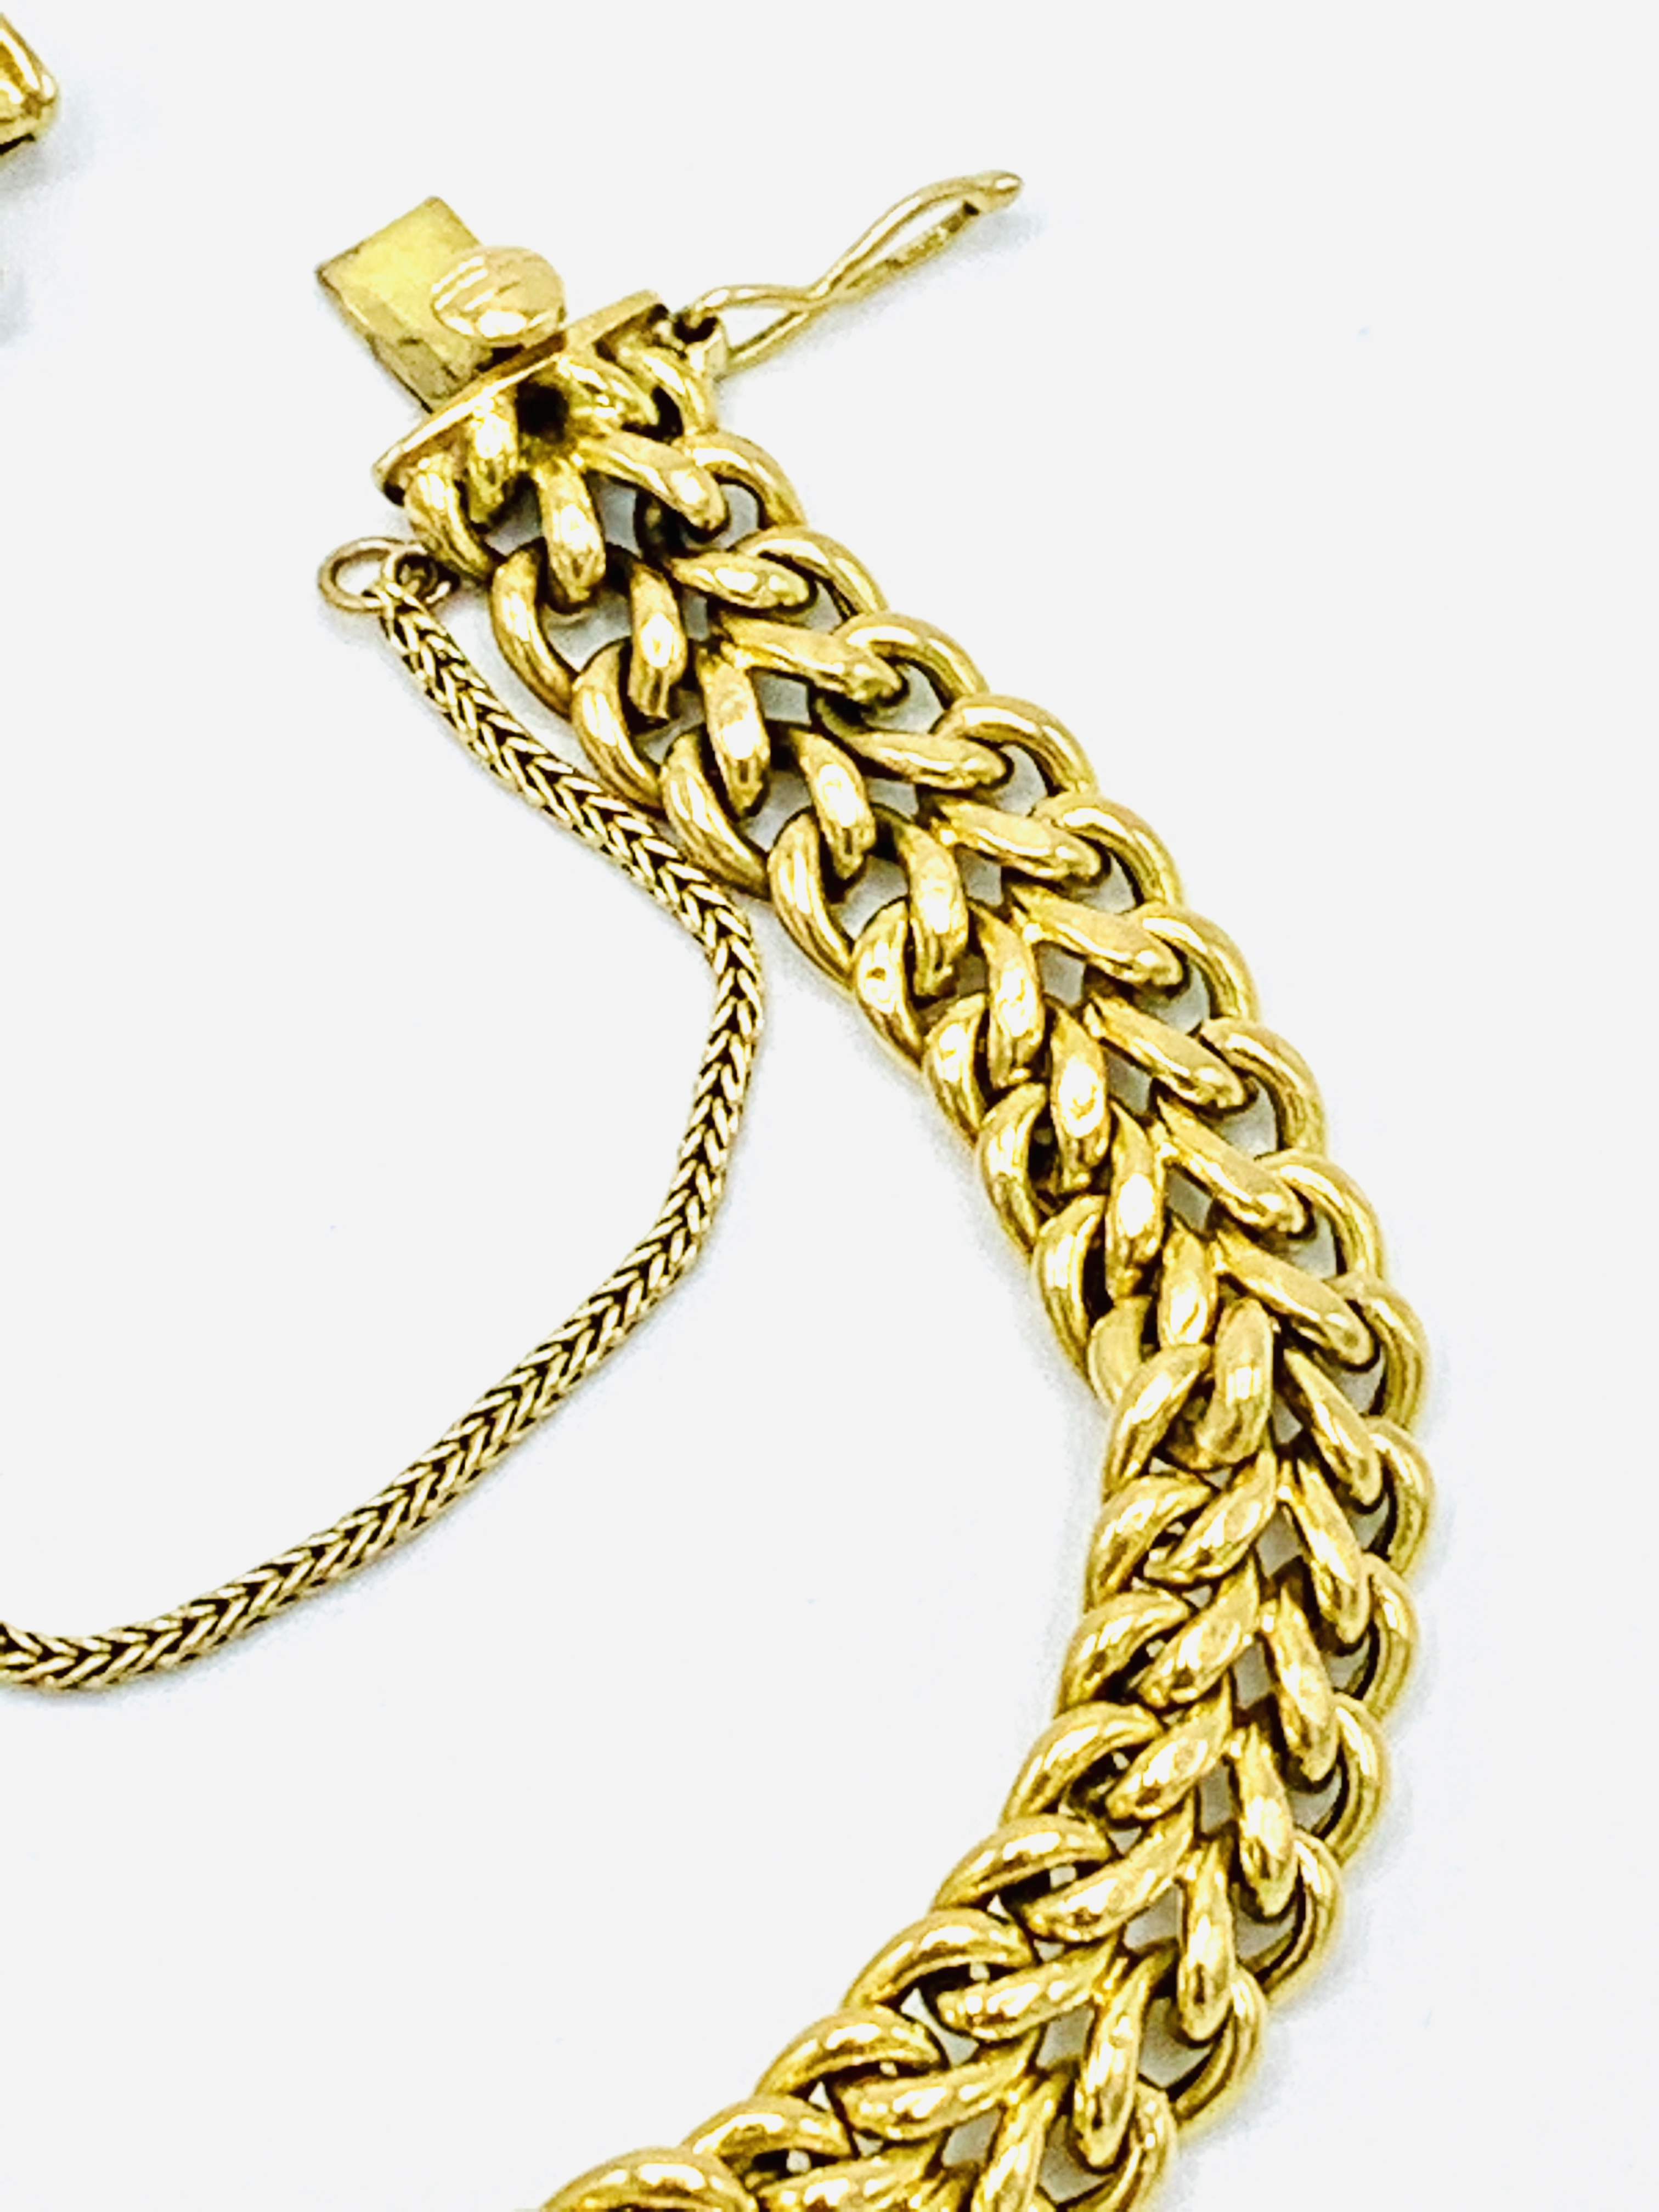 375 gold double chain bracelet - Image 2 of 3